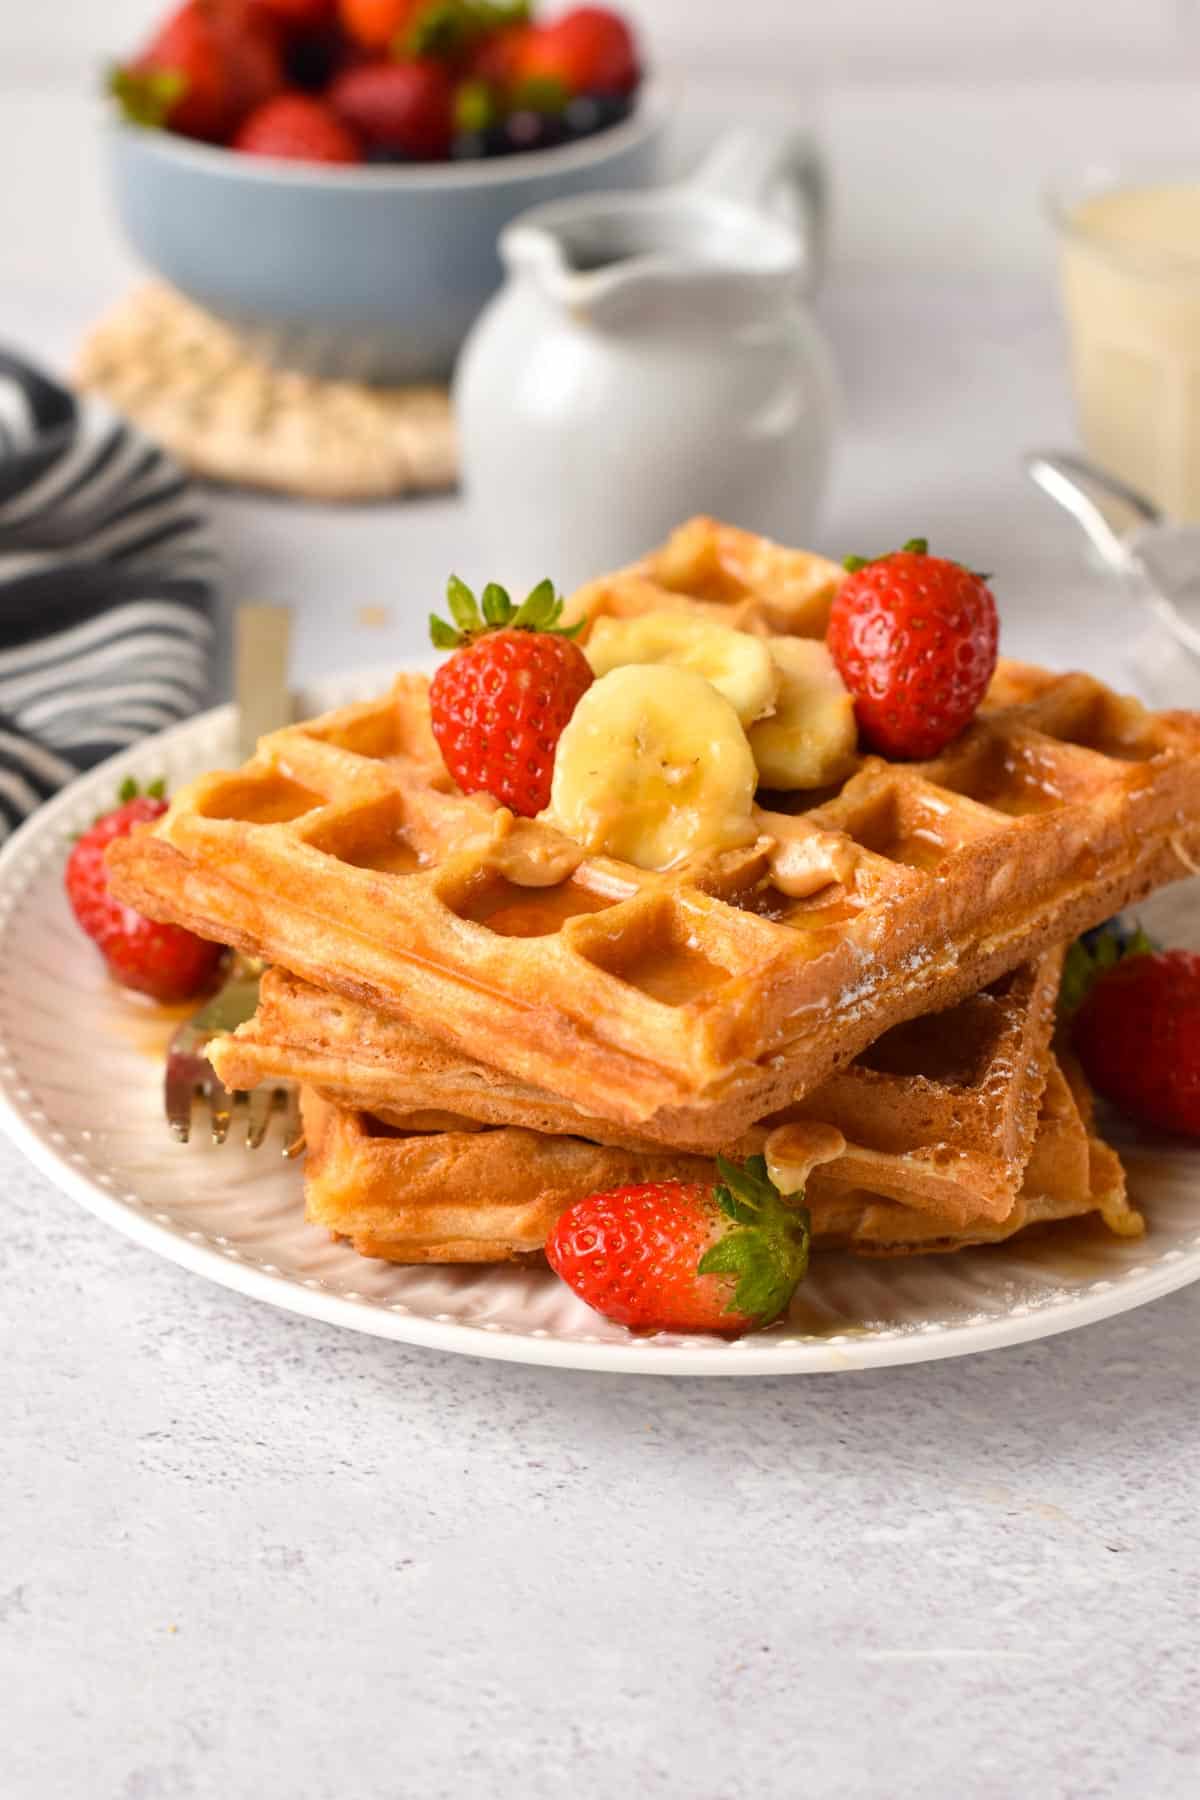 These Vegan Protein Waffles are easy crispy protein waffles packed with 8.5 g of proteins per serving. They are fully plant-based and easy to make in the morning in less than 20 minutes.